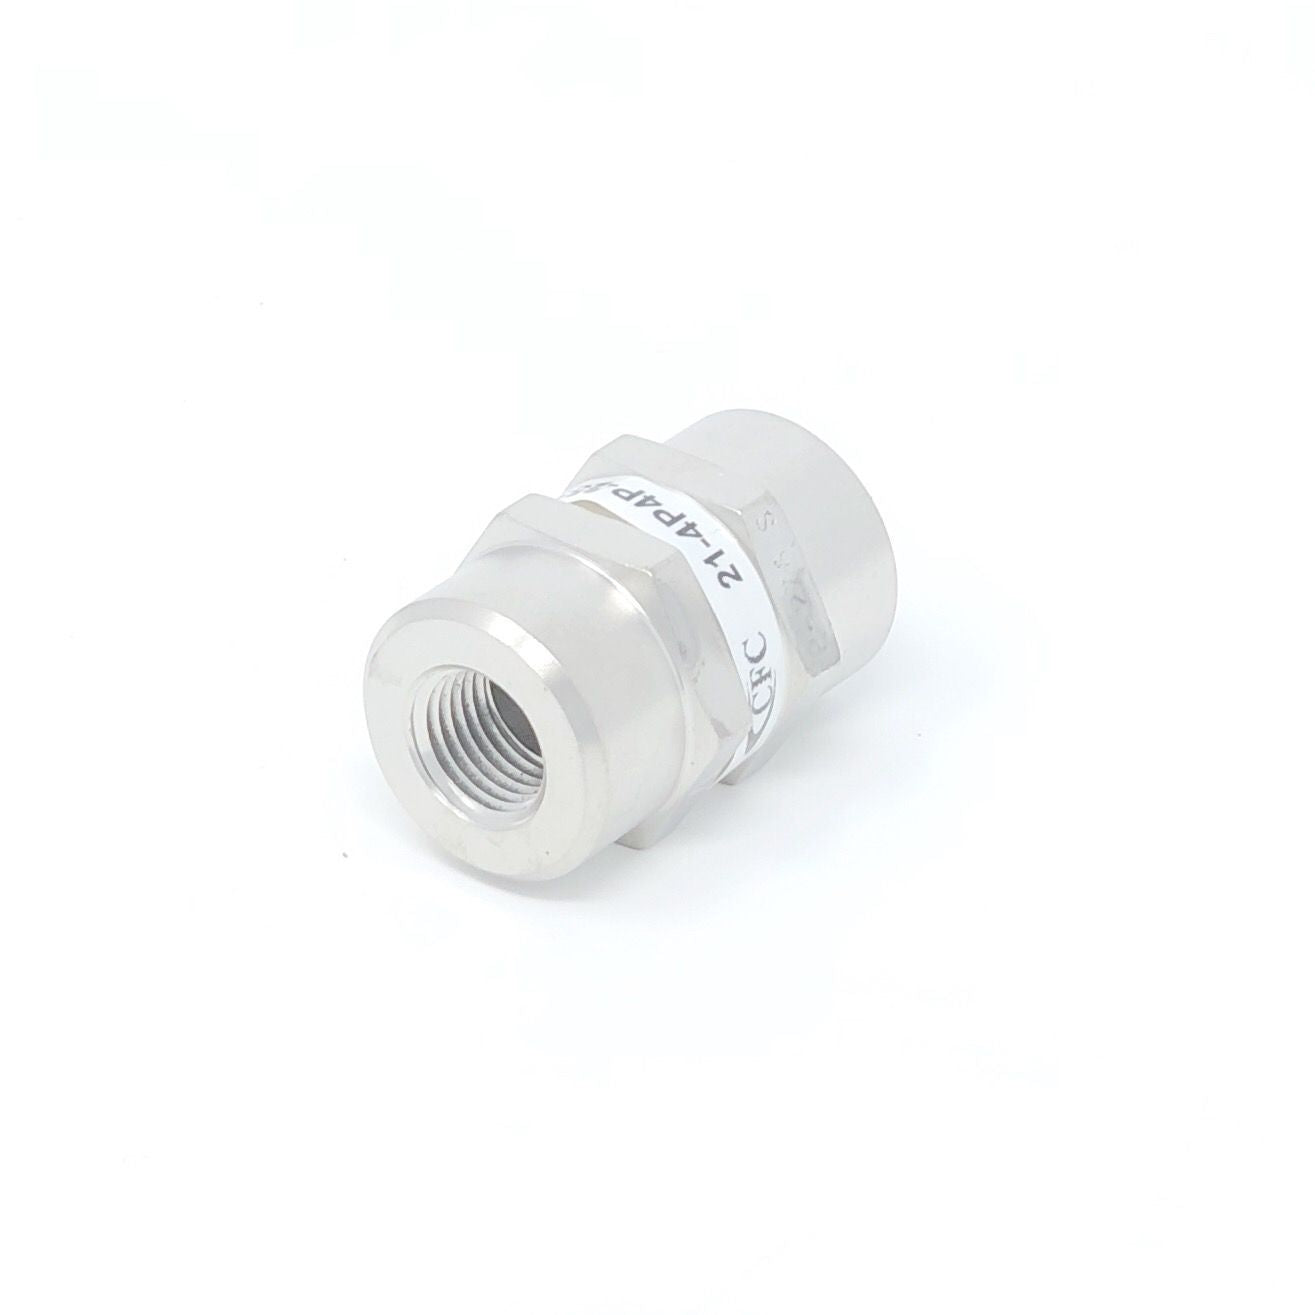 21-12P12P-18S : Chase High Pressure Inline Filter, 3000psi, 3/4" NPT, 18 Micron, No Visual Indicator, No Bypass